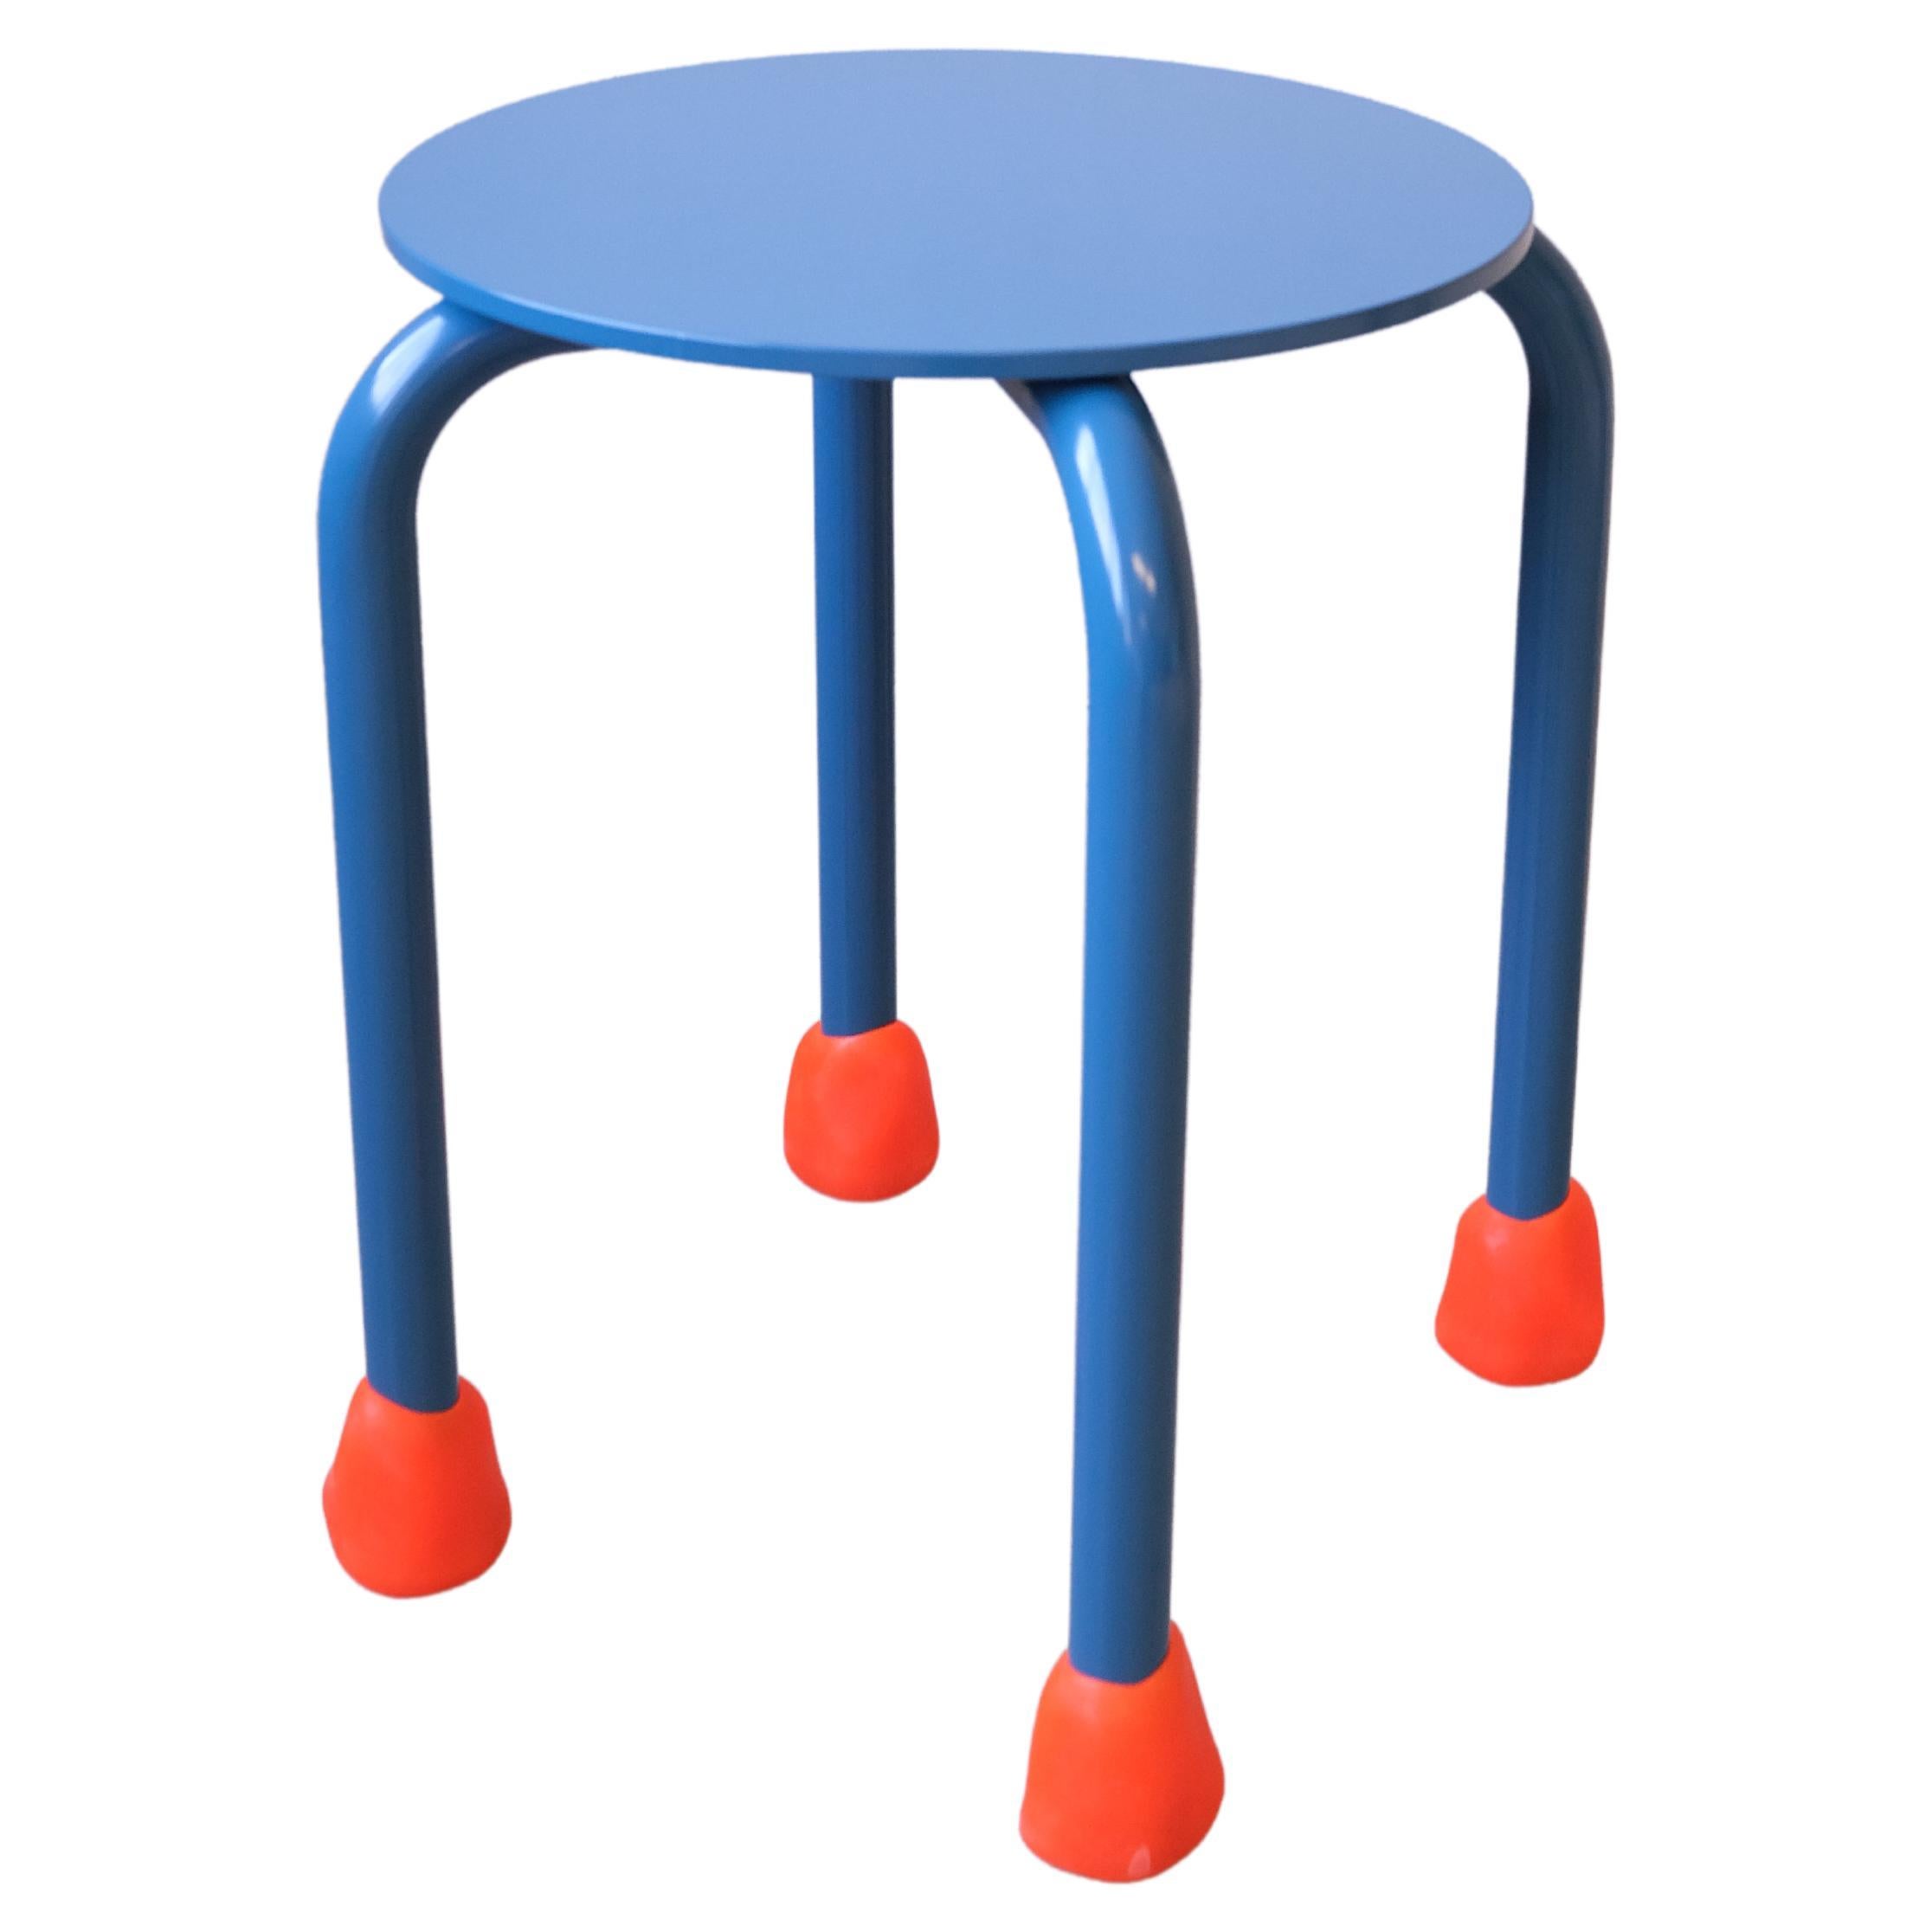 Aluminum Contemporary Blue Stool, Casted Rubber Feets in Neon Orange